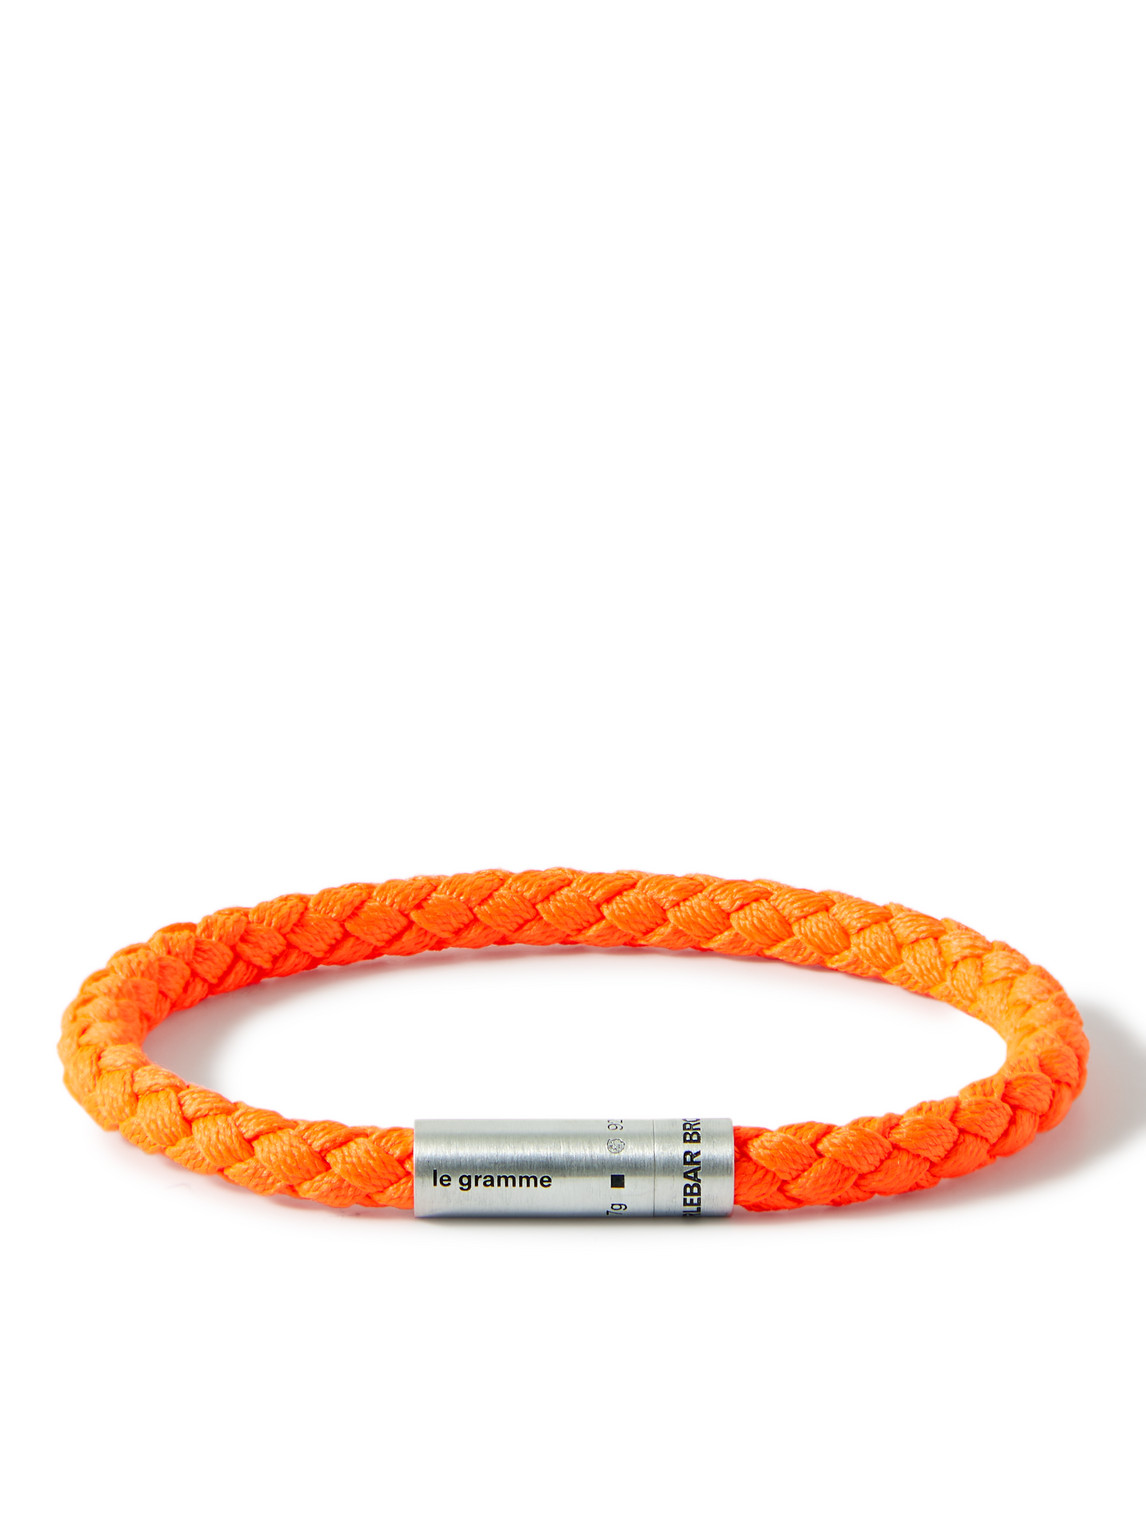 Le Gramme Orlebar Brown 7g Braided Cord And Sterling Silver Bracelet In Orange